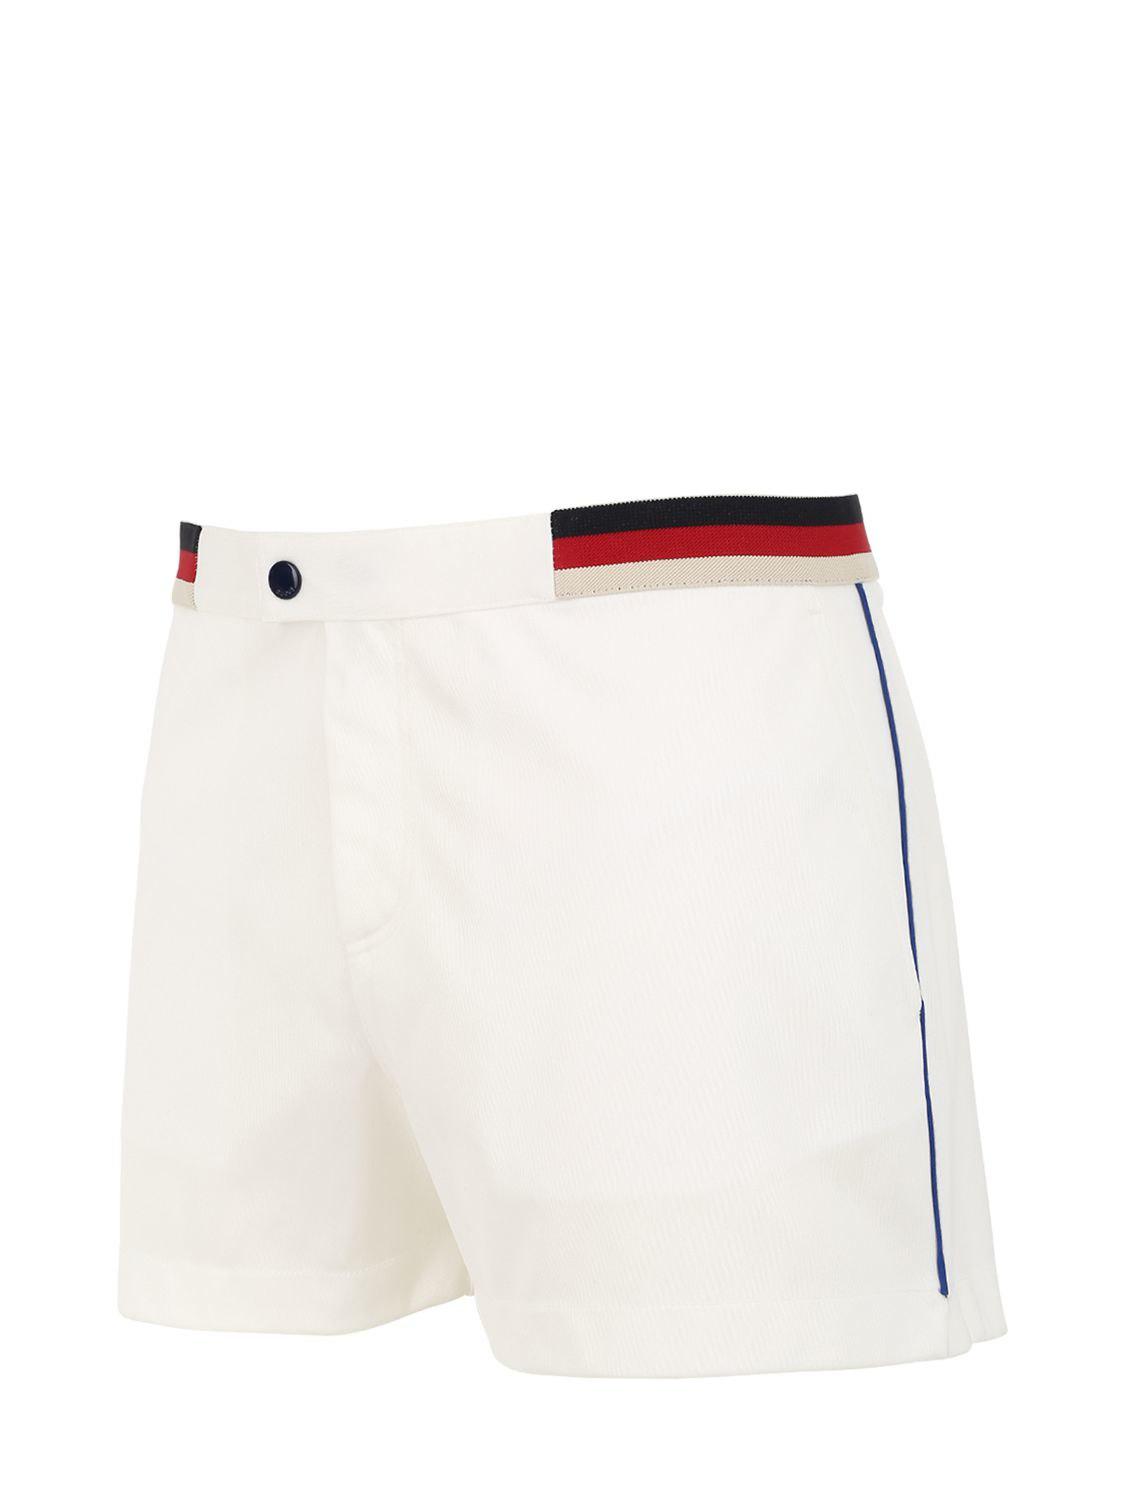 Gucci Jersey Swim Shorts W/ Web Piping Details in White for Men - Lyst